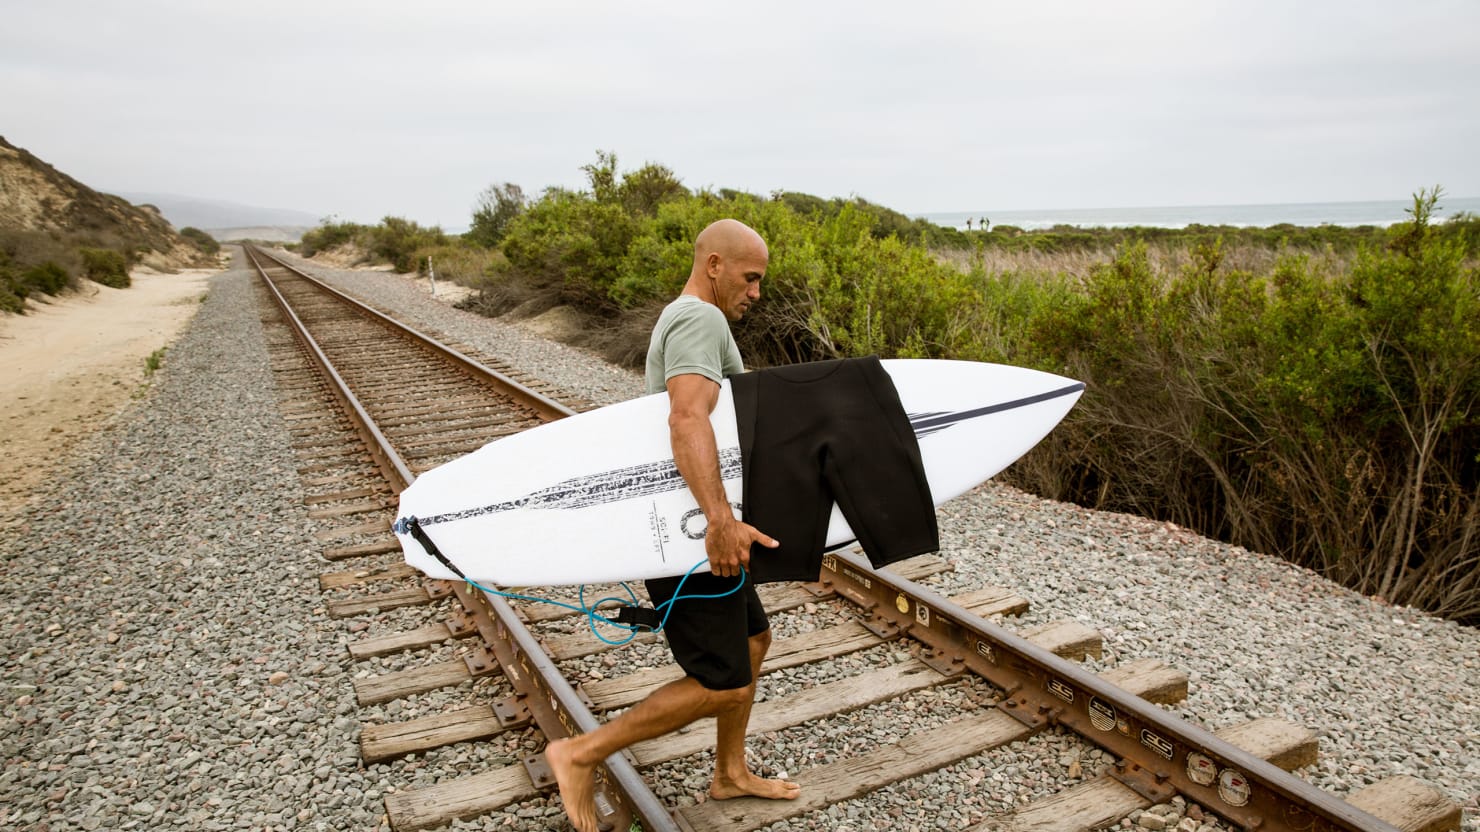 Kelly Slater designs a sustainable clothing line from recycled